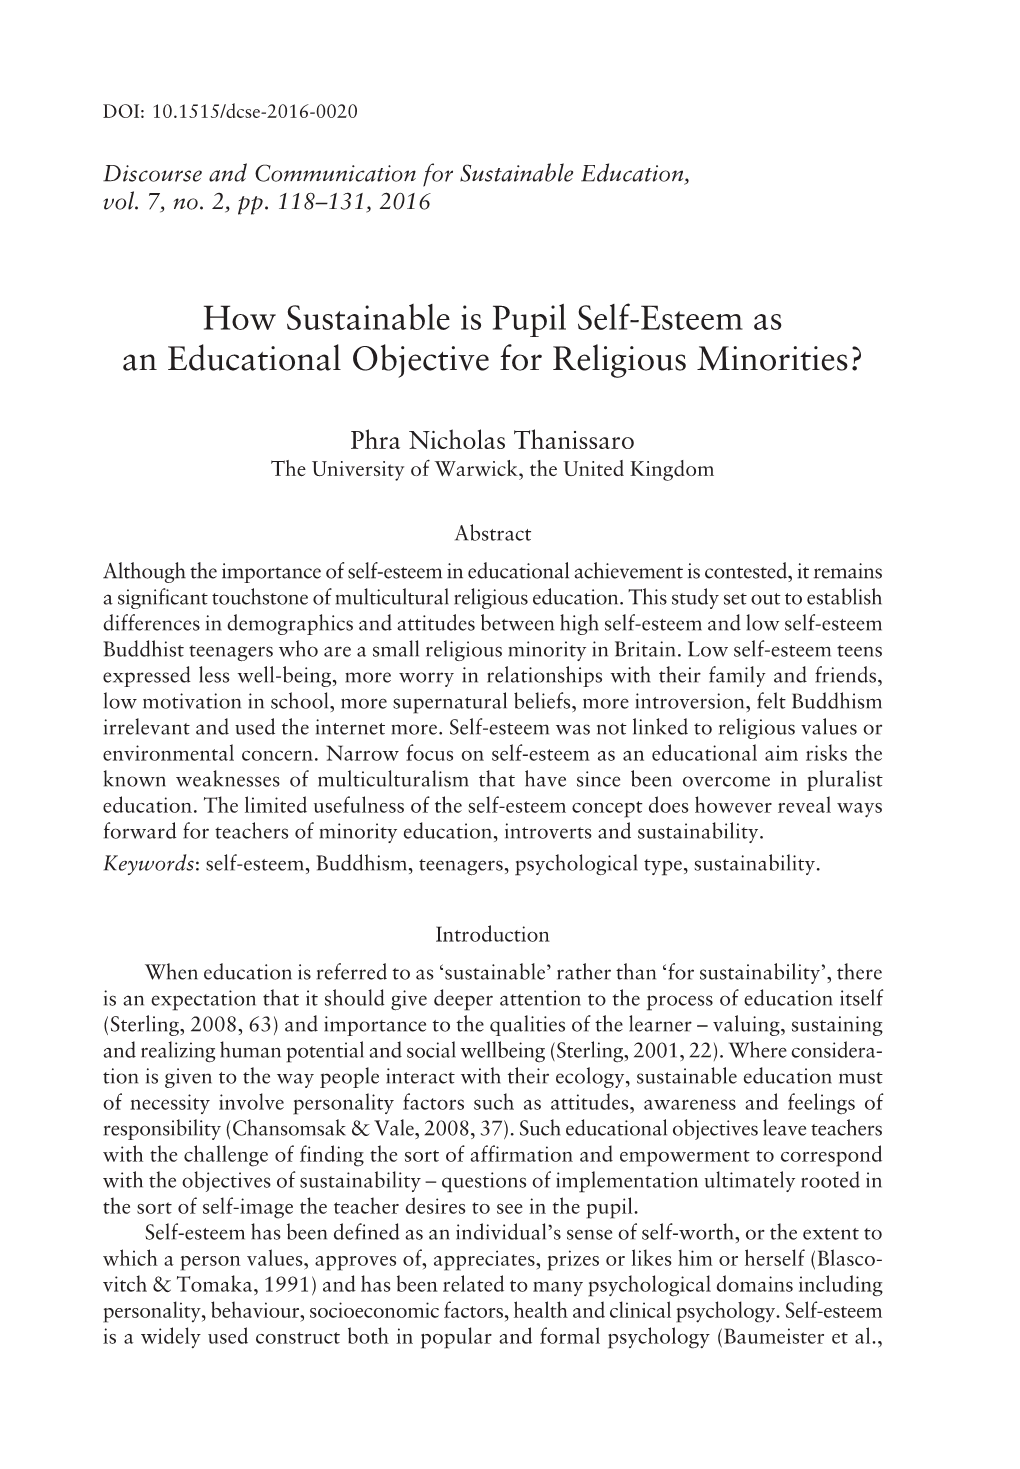 How Sustainable Is Pupil Self-Esteem As an Educational Objective for Religious Minorities?